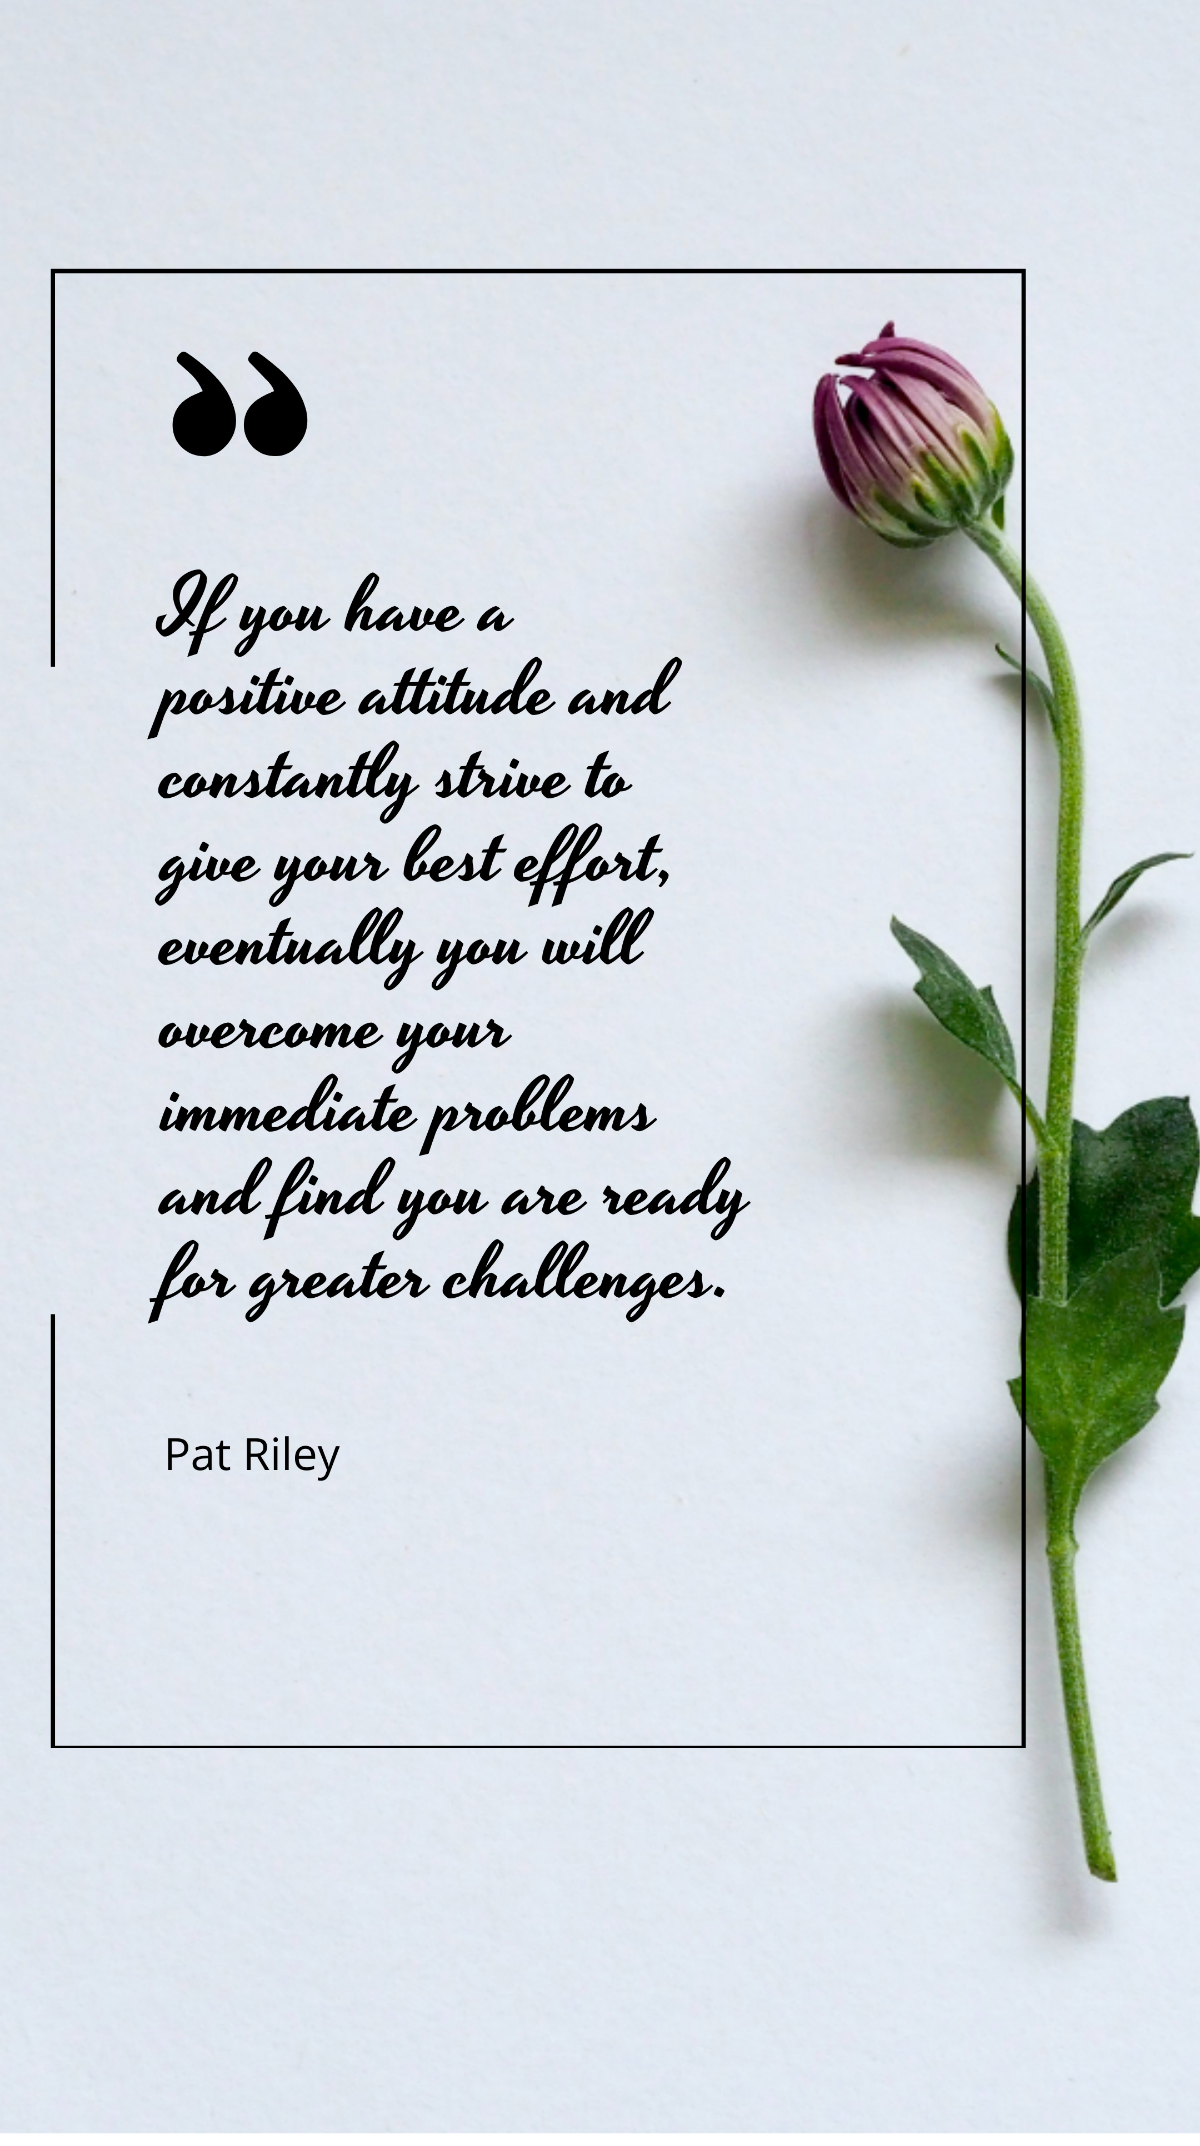  Pat Riley - If you have a positive attitude and constantly strive to give your best effort, eventually you will overcome your immediate problems and find you are ready for greater challenges. Templat